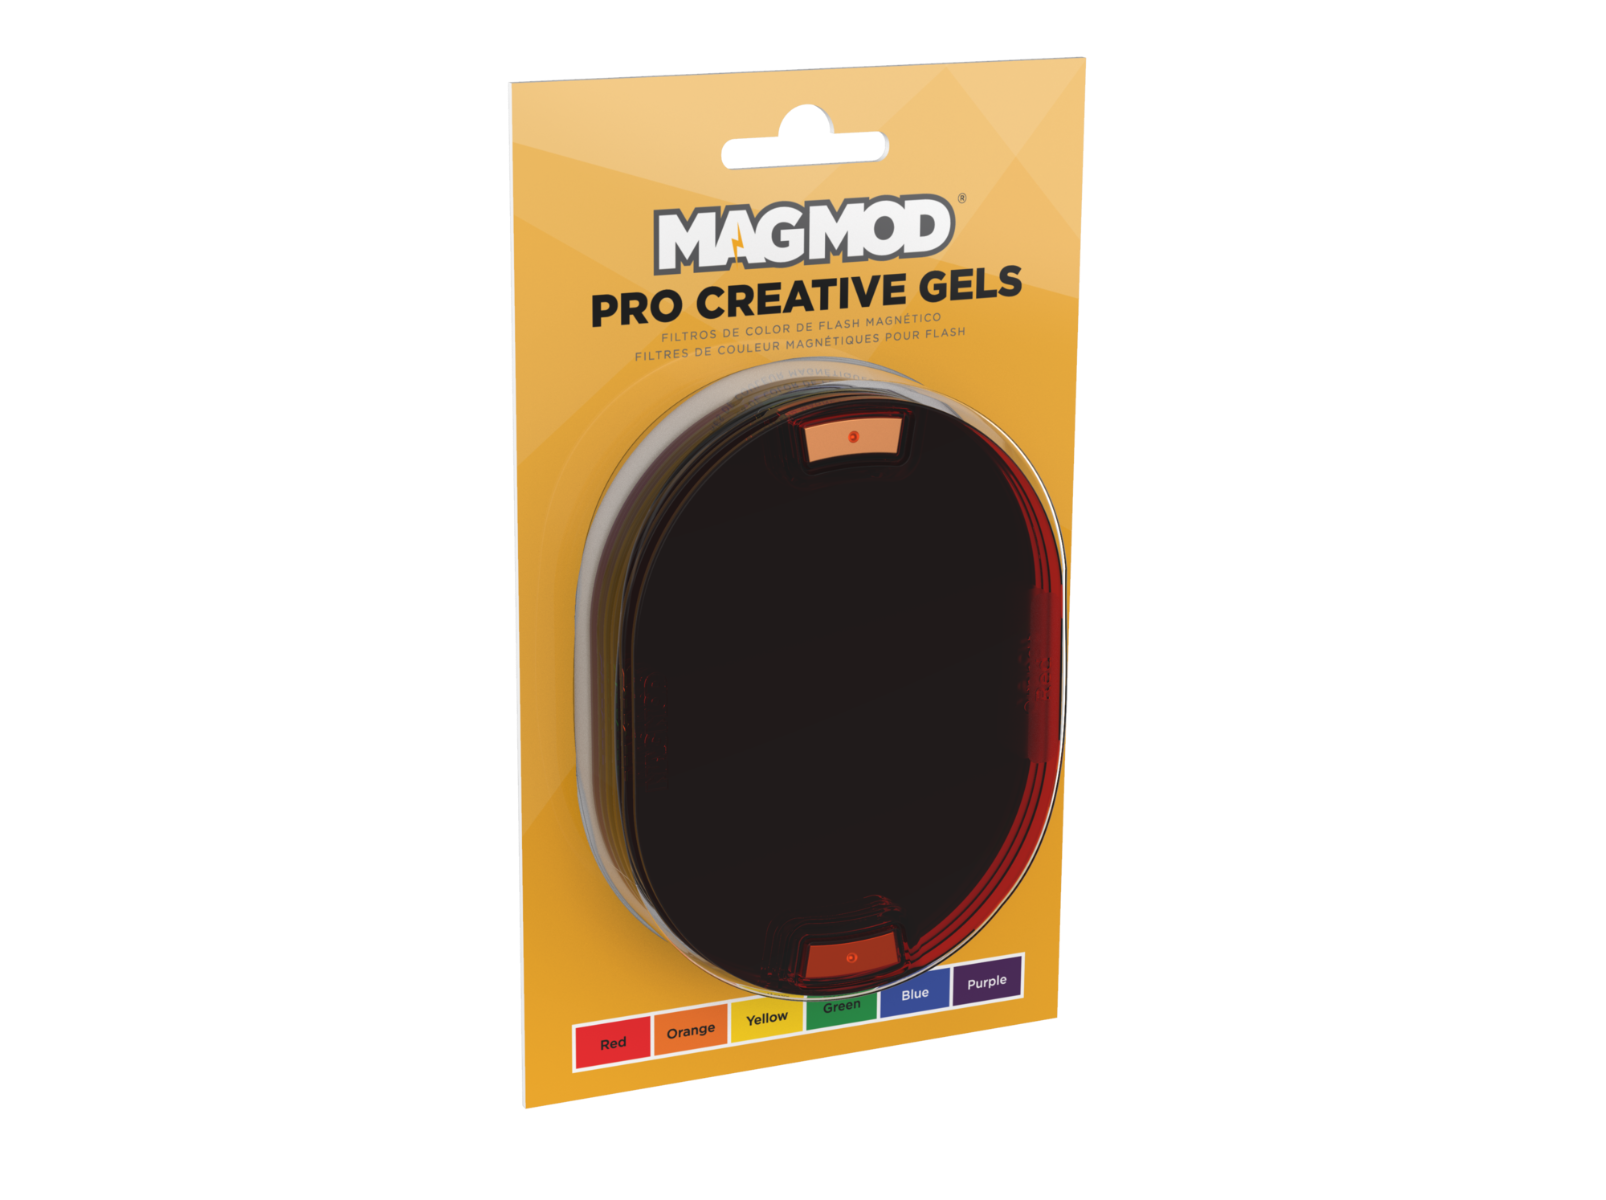 Product Image of Magmod Pro Creative Gels